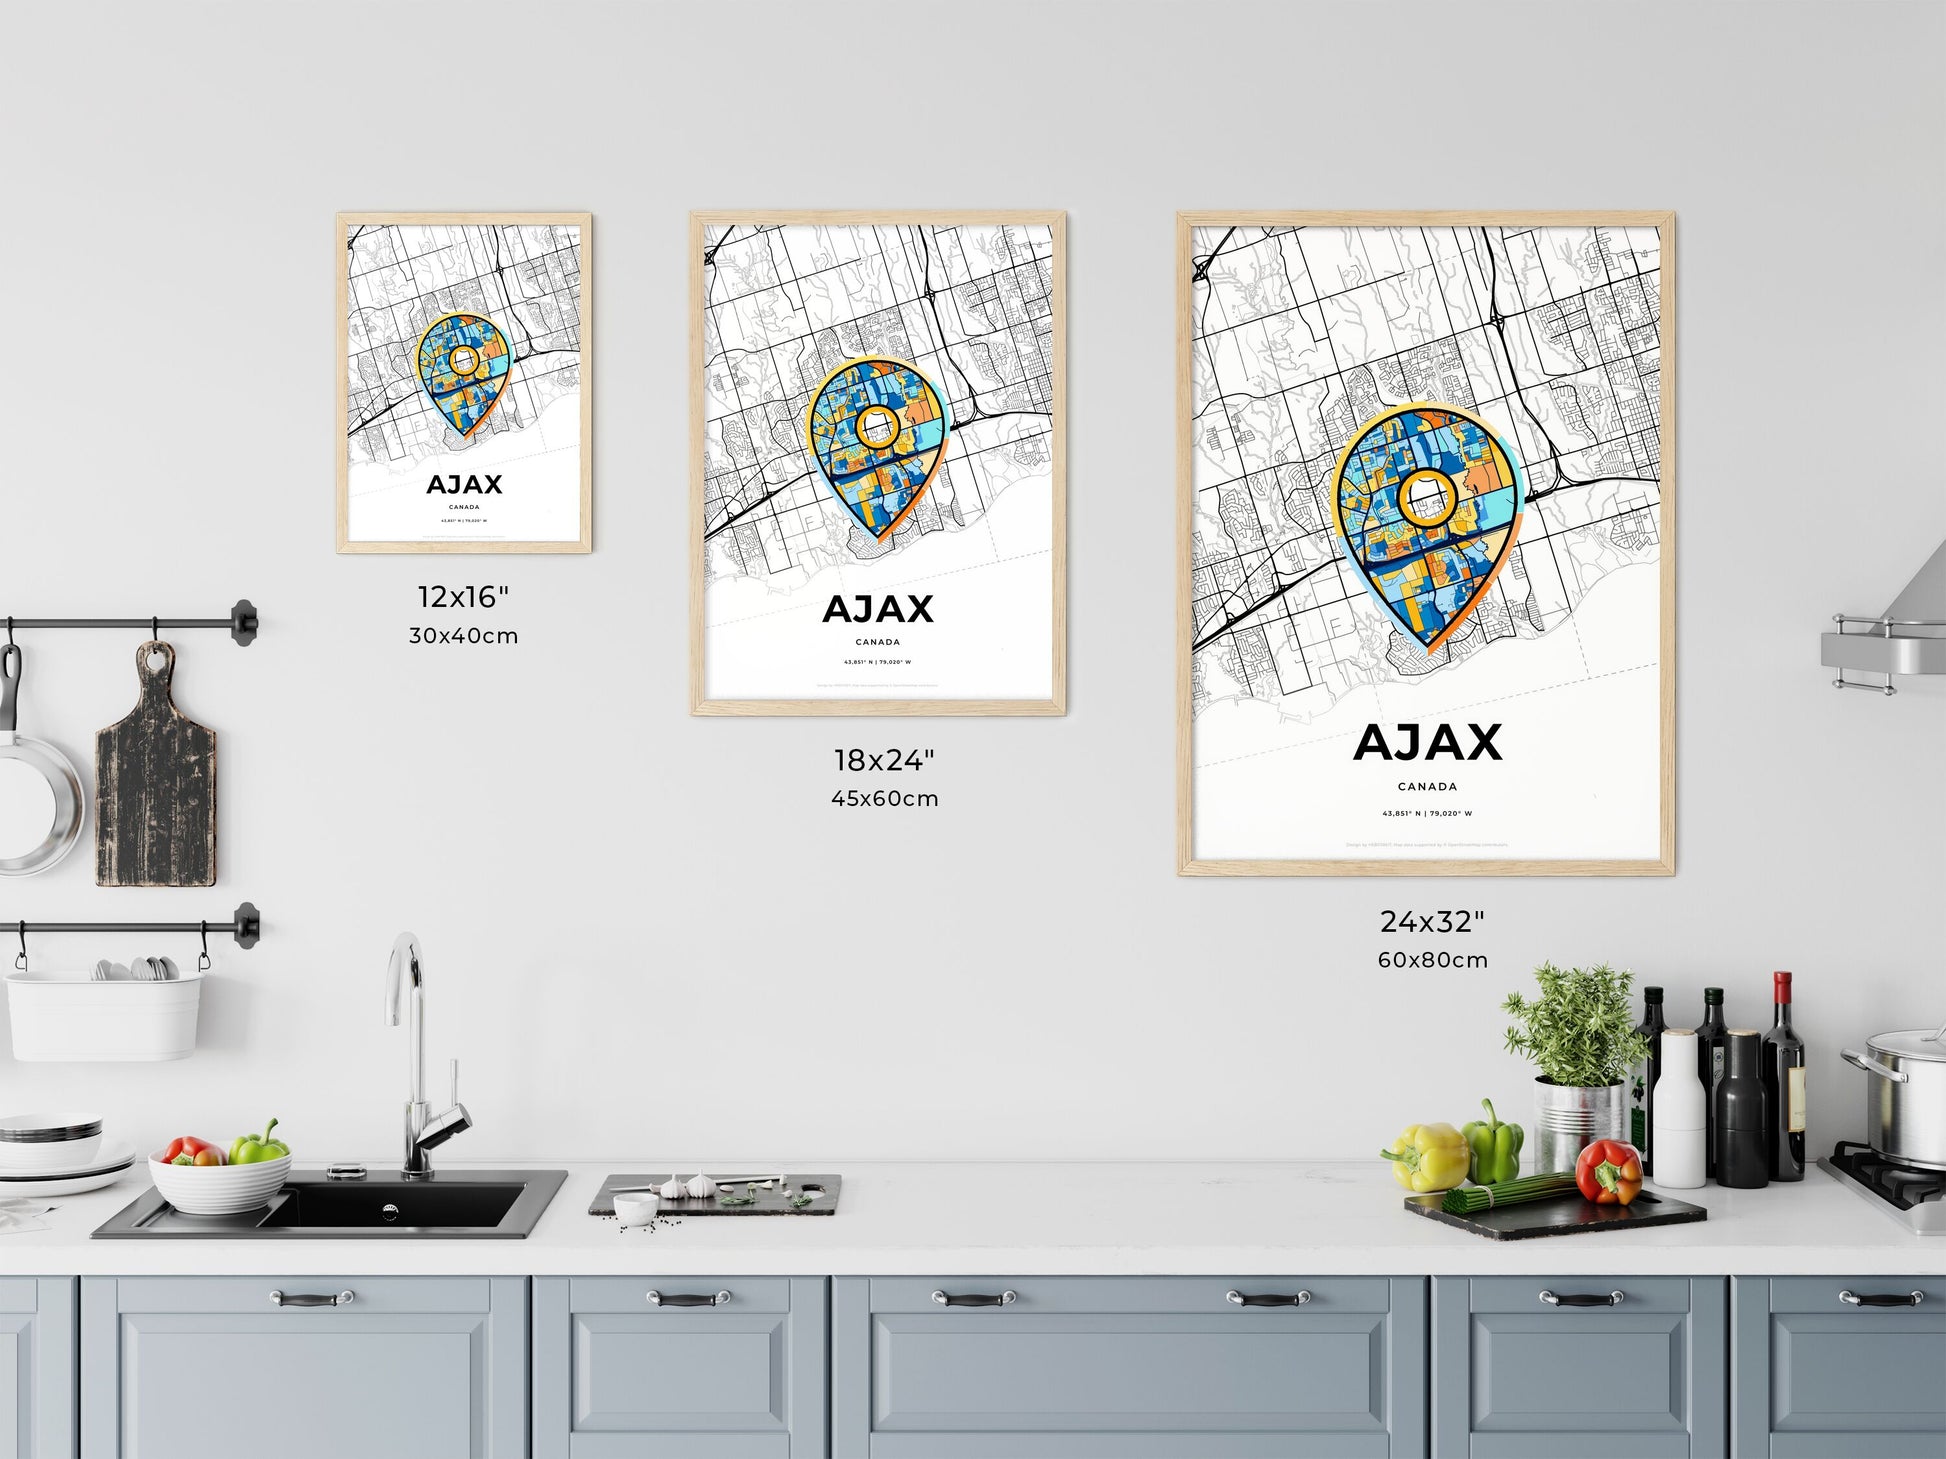 AJAX CANADA minimal art map with a colorful icon. Where it all began, Couple map gift.